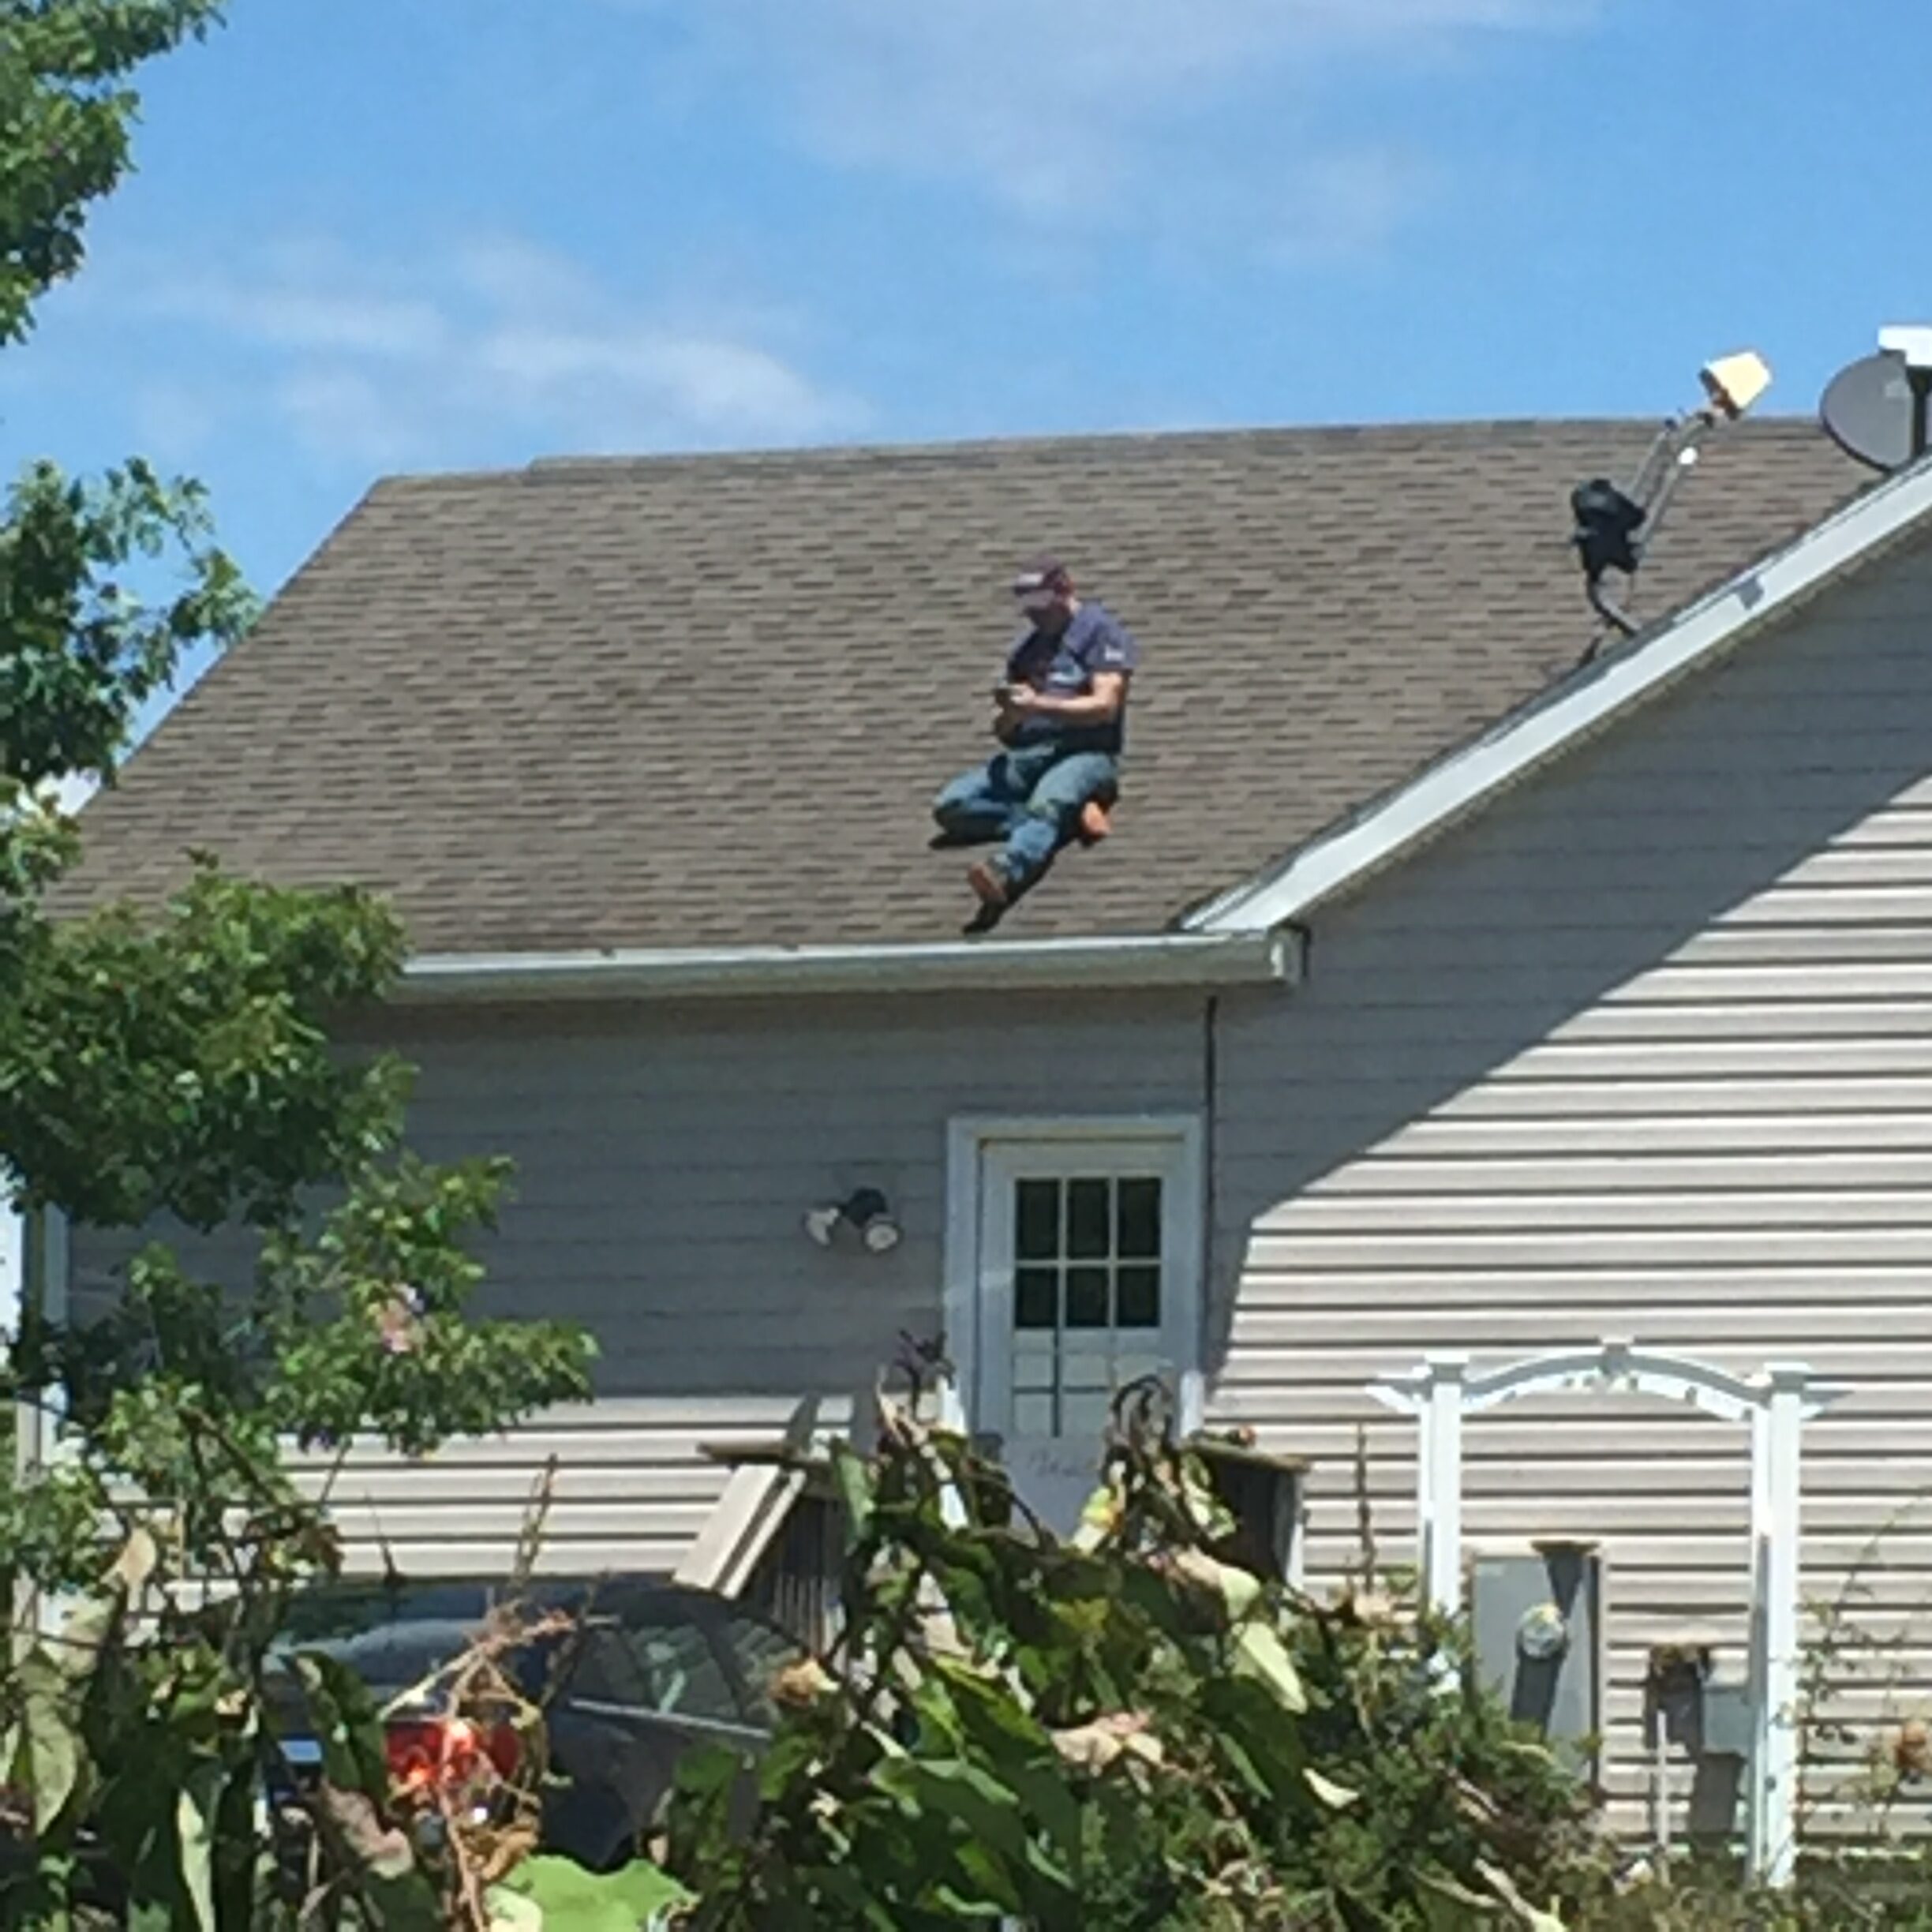 Jared stuck on the roof